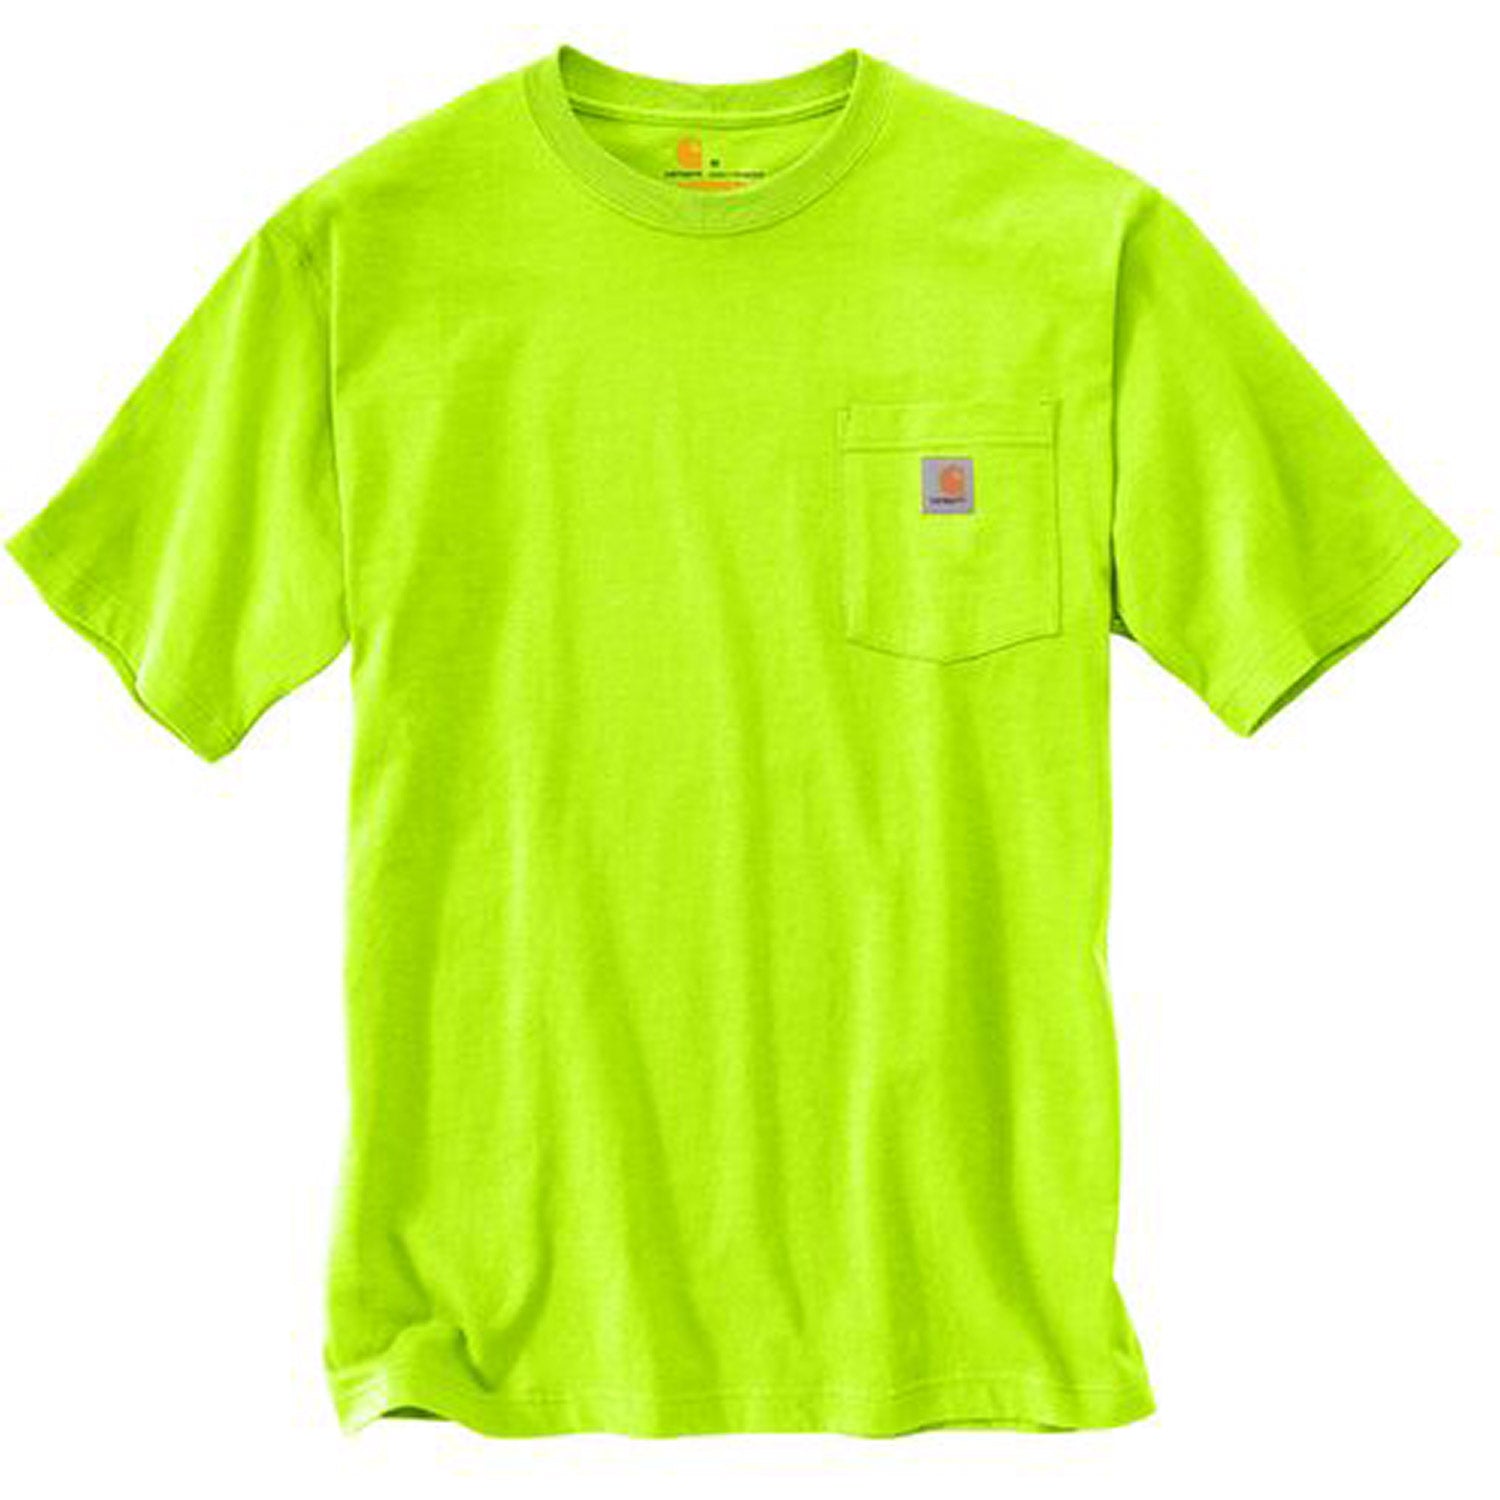 K87 - Loose Fit Heavyweight Pocket Tee, Bright Lime